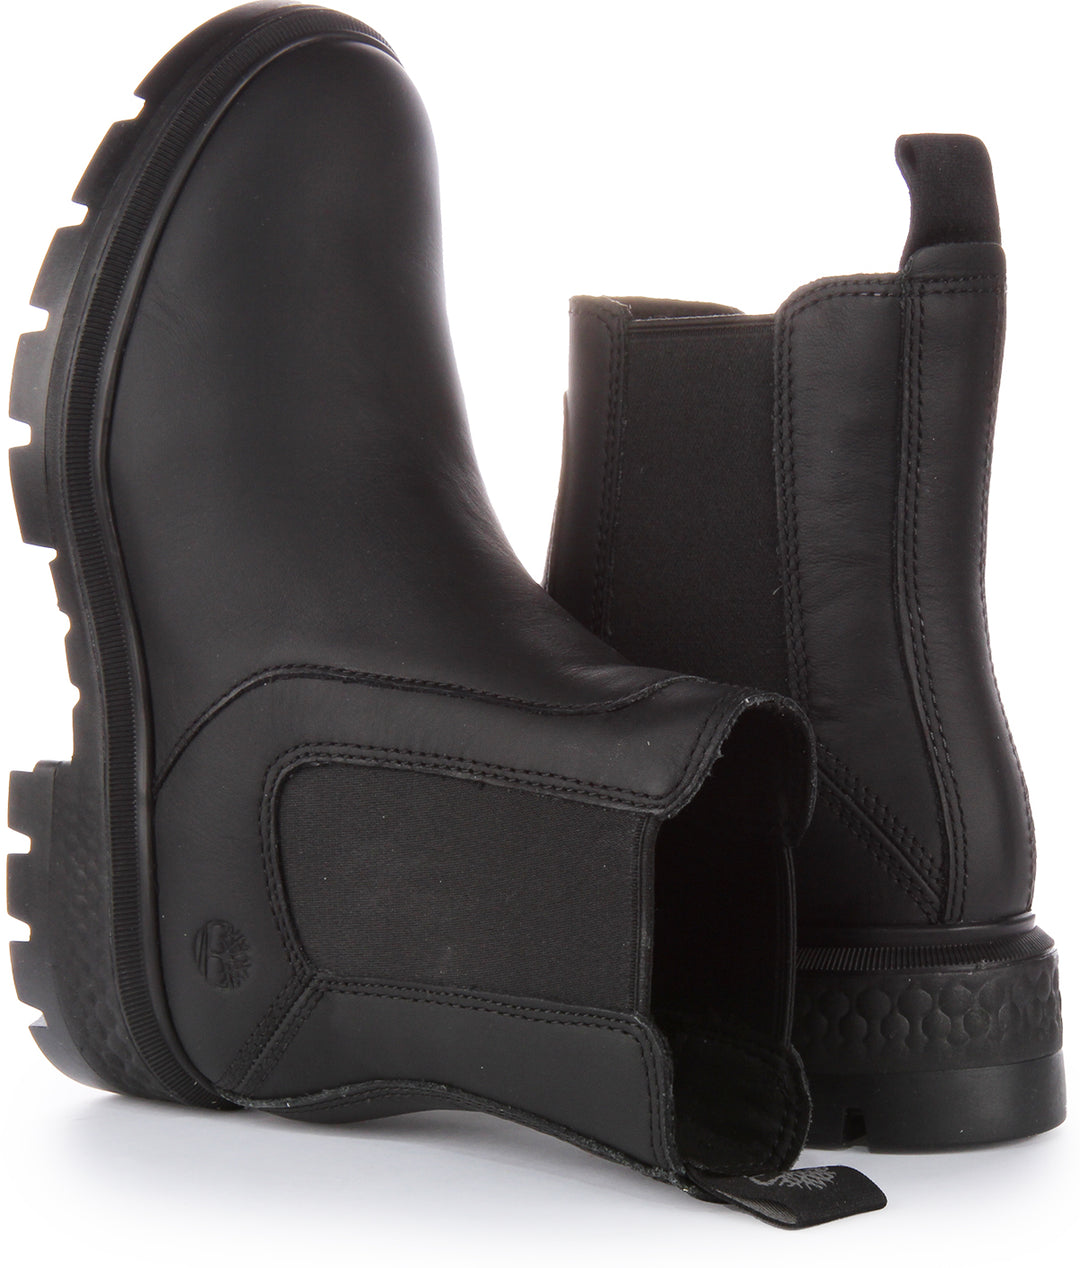 Timberland A5Nd7 Chelsea Boots In Black For Women